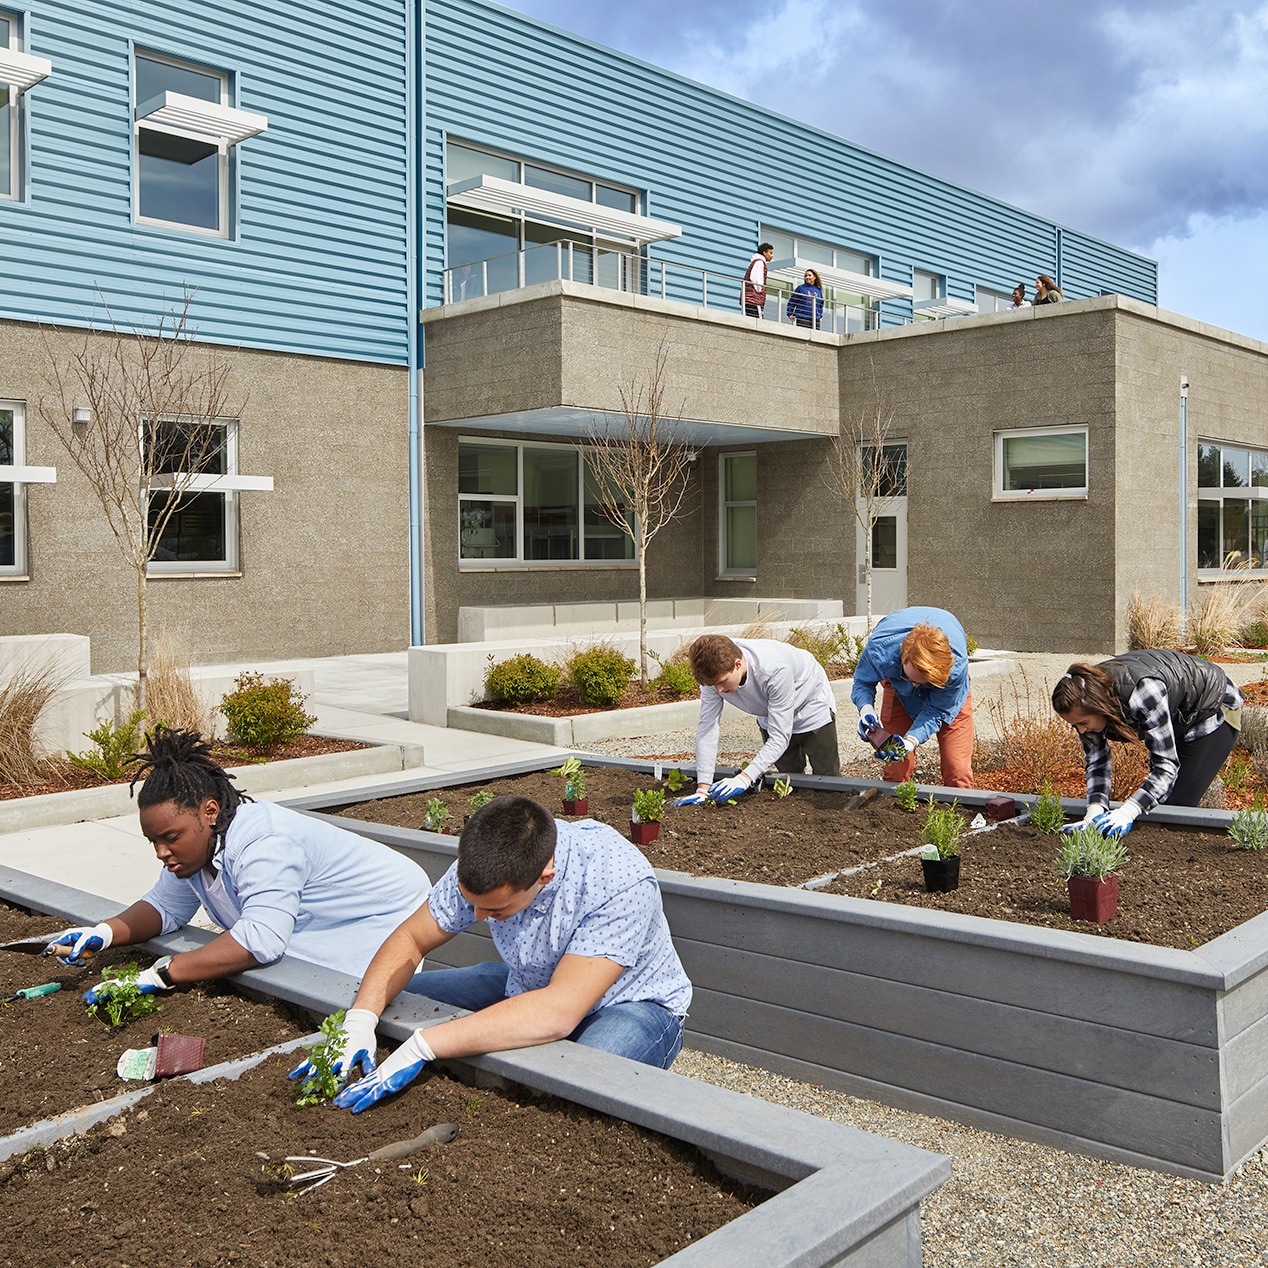 Carefully planned site features that provide space for quiet reflection and relaxation can also double as outdoor learning opportunities. Wilson High School